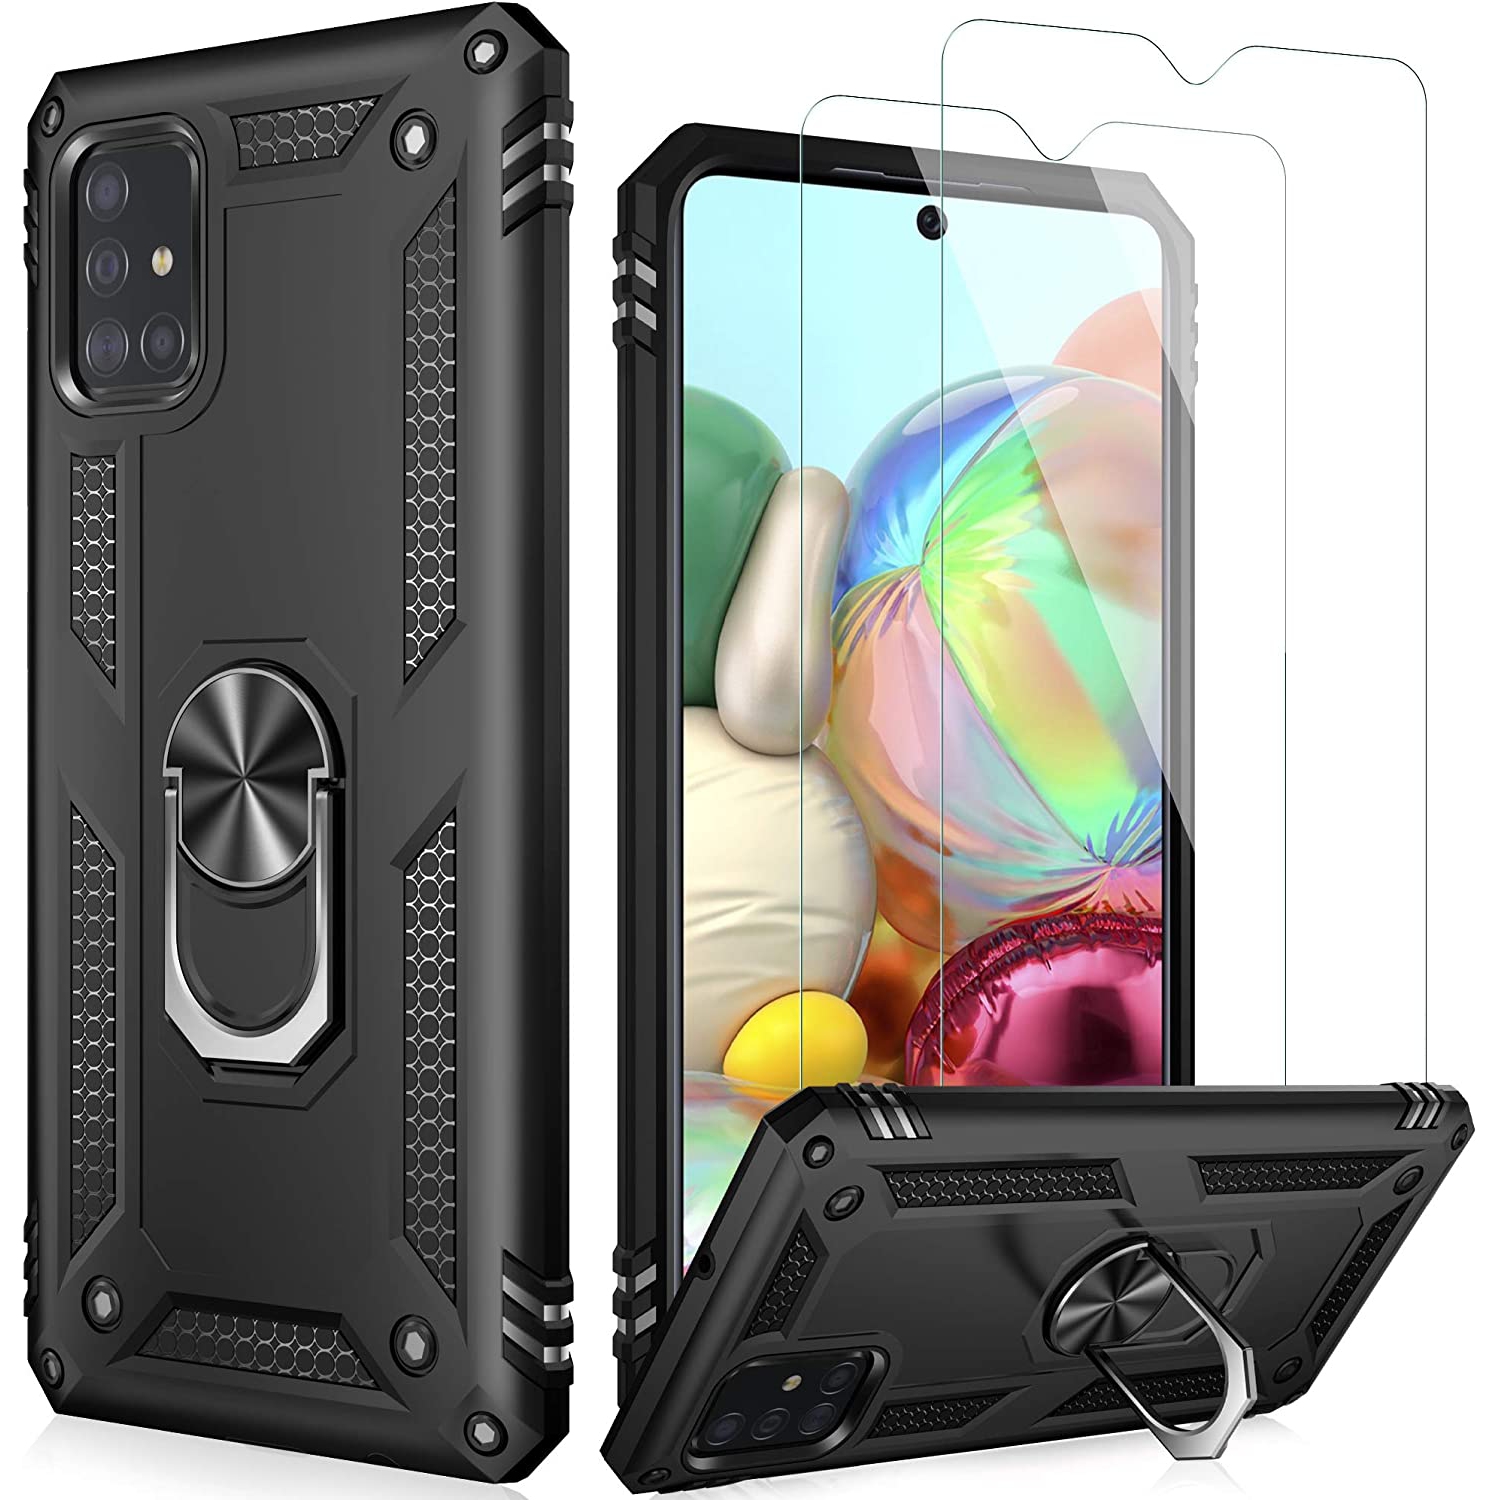 Galaxy A51 Case,Pass 16ft. Drop Tested Military Grade Cover with Magnetic Ring Kickstand Compatible with Car Mount Holder,Protective Phone Case for Samsung Galaxy A51 4G LT